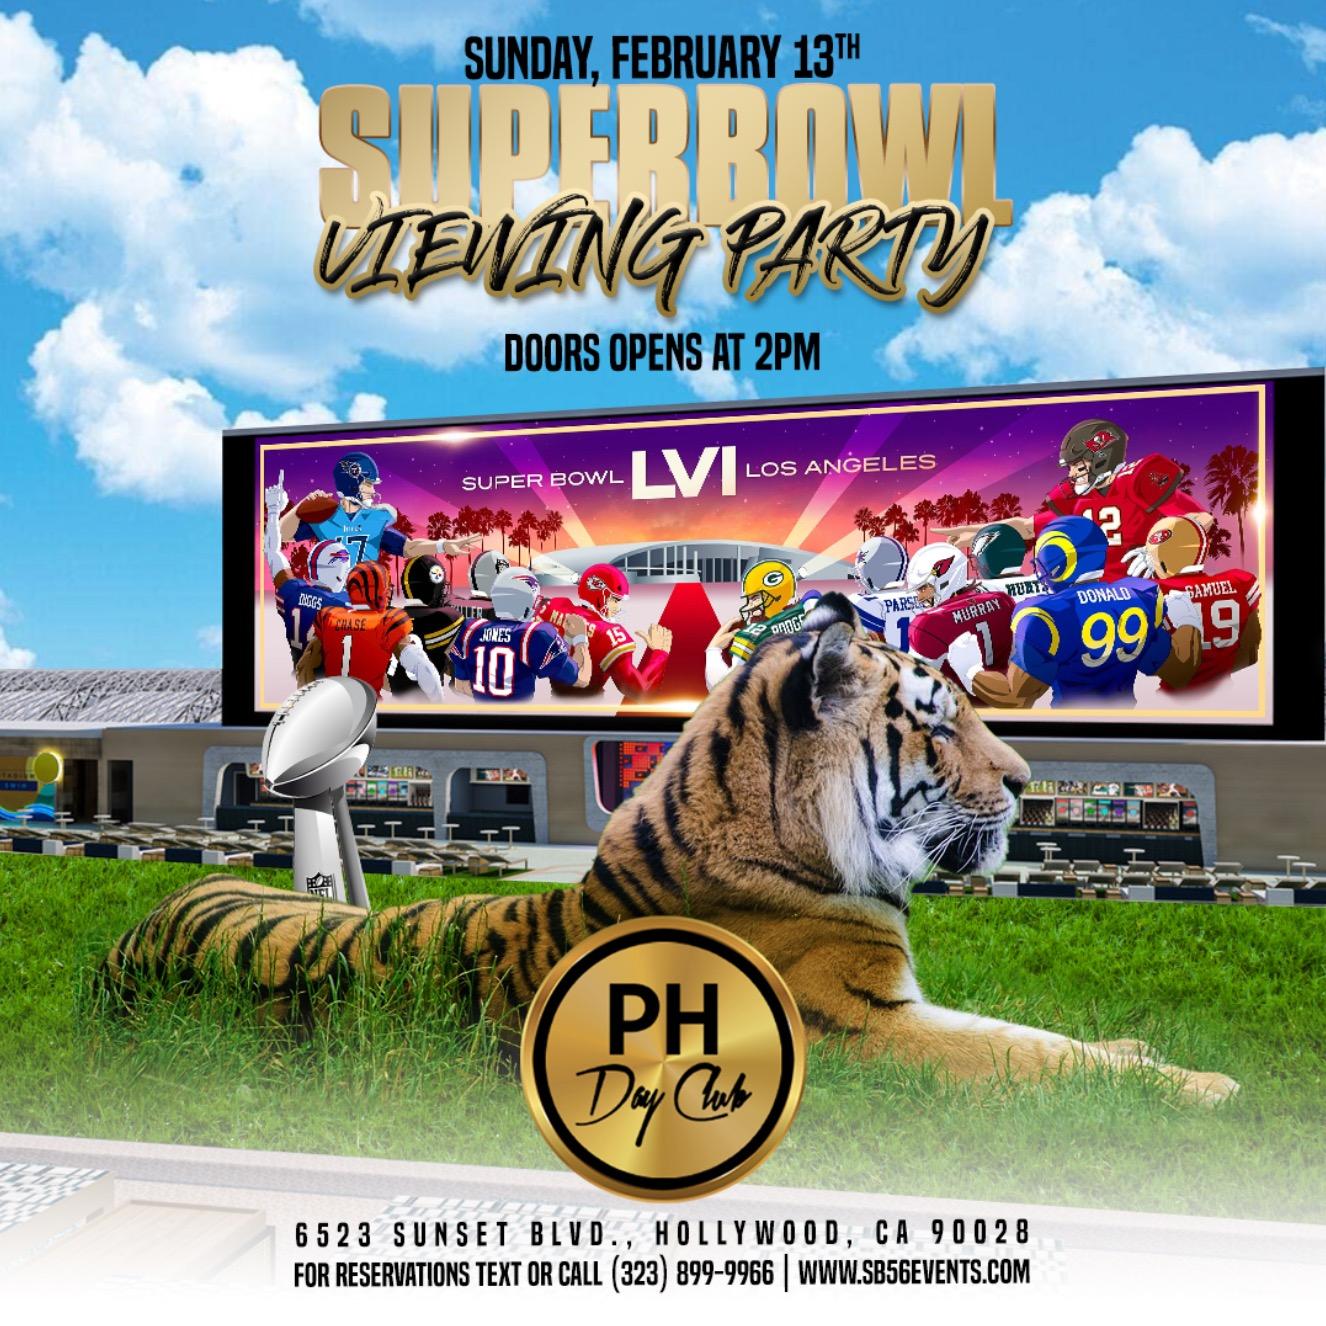 PH DAY CLUB: SUPERBOWL SUNDAY VIEWING PARTY